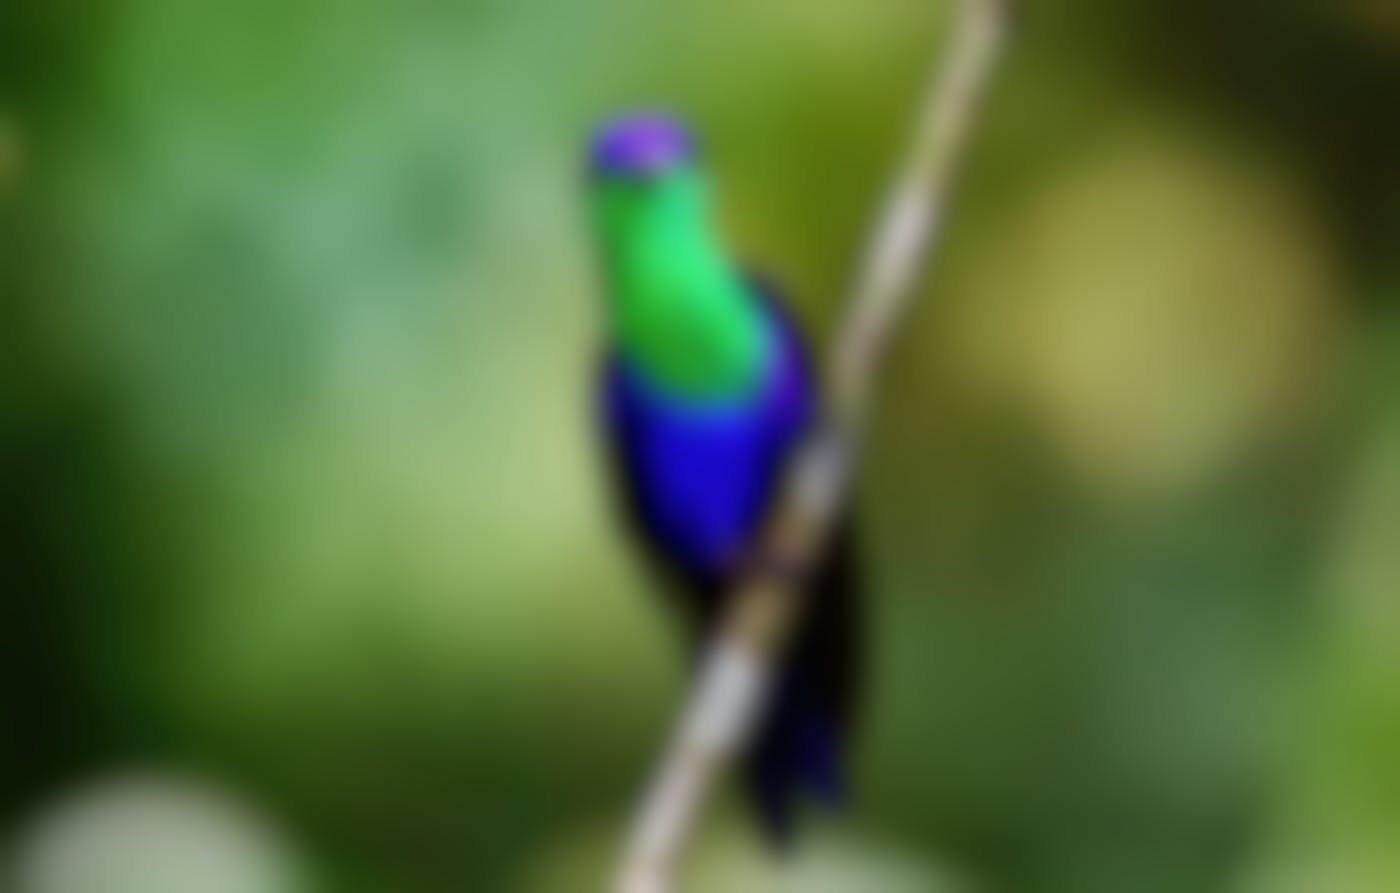 a small, irridescent bird with blue and green plummage